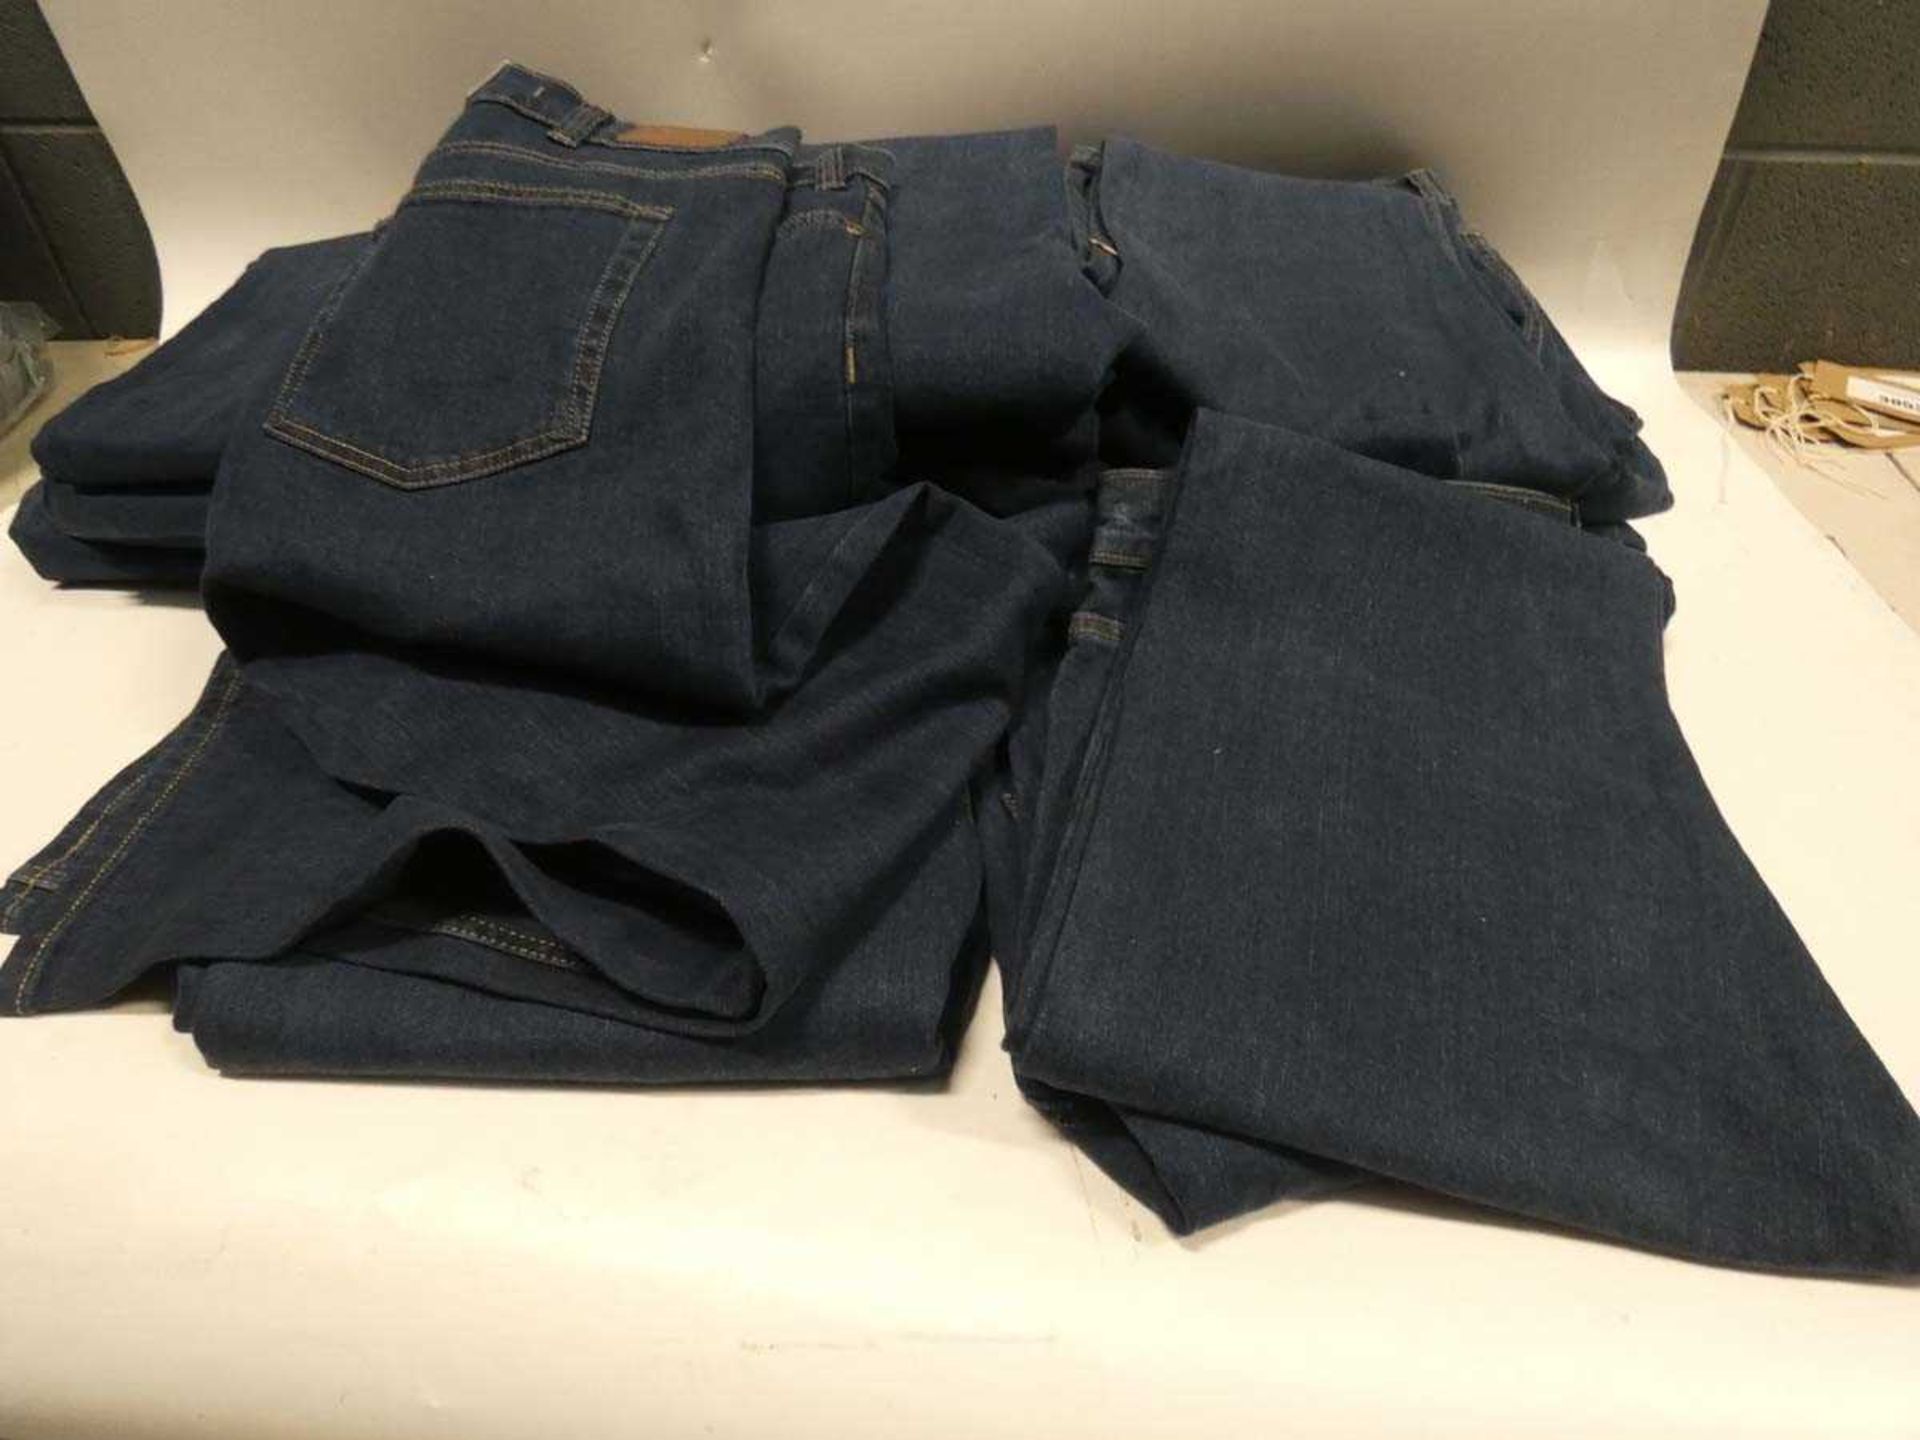 +VAT Bag of Kirkland jeans sizes vary from 38/32" and 40/30" approx. 20 pairs